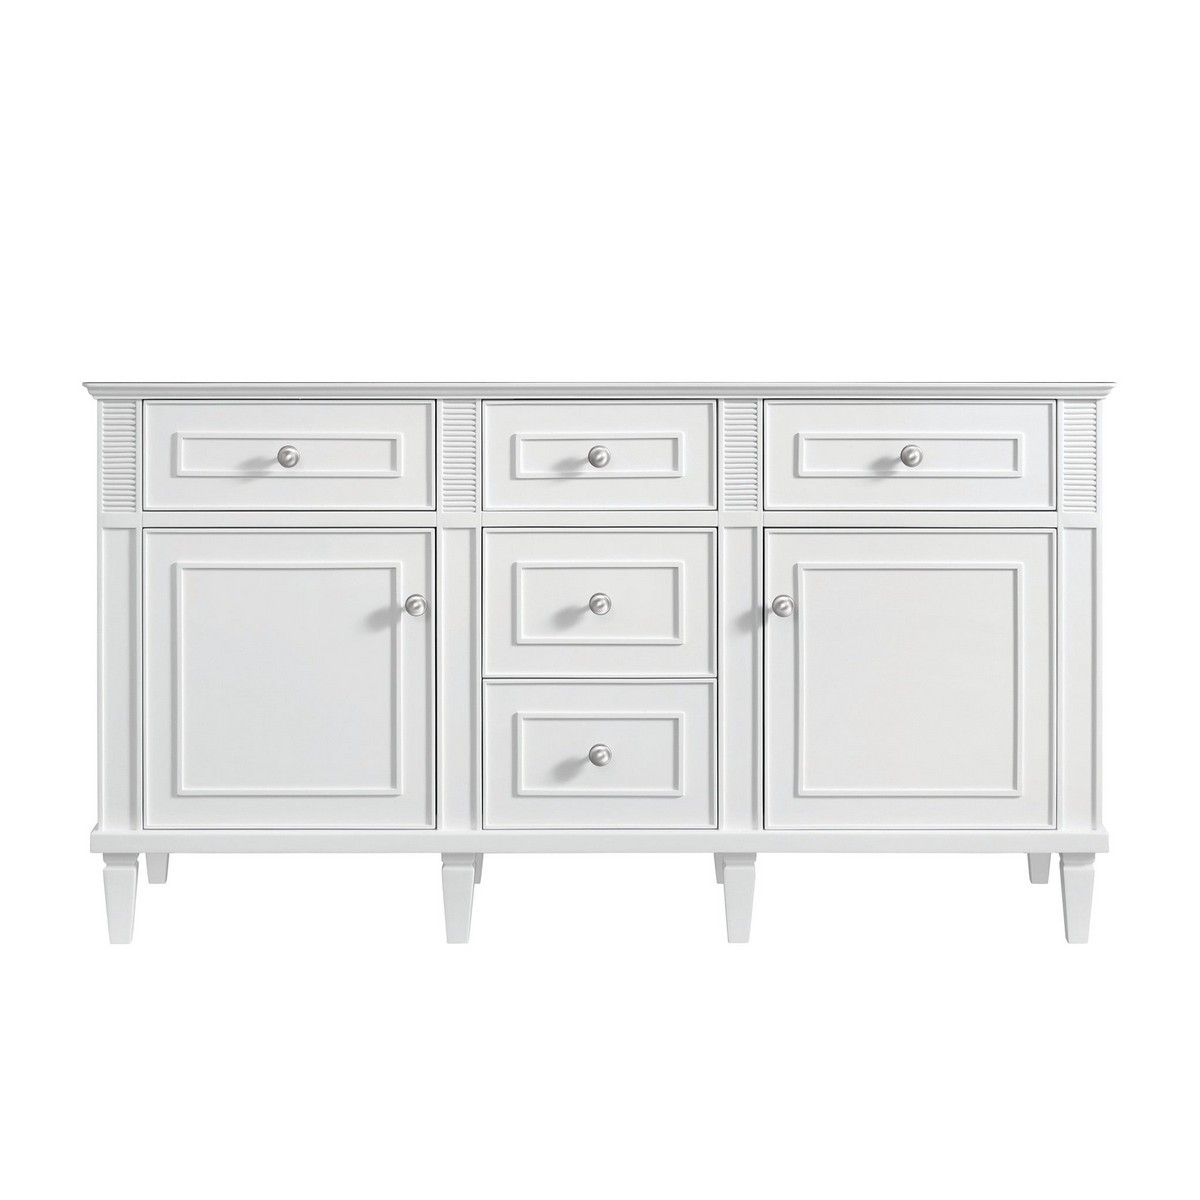 JAMES MARTIN 424-V60D LORELAI 59 7/8 INCH FREE-STANDING DOUBLE SINK BATHROOM VANITY CABINET ONLY